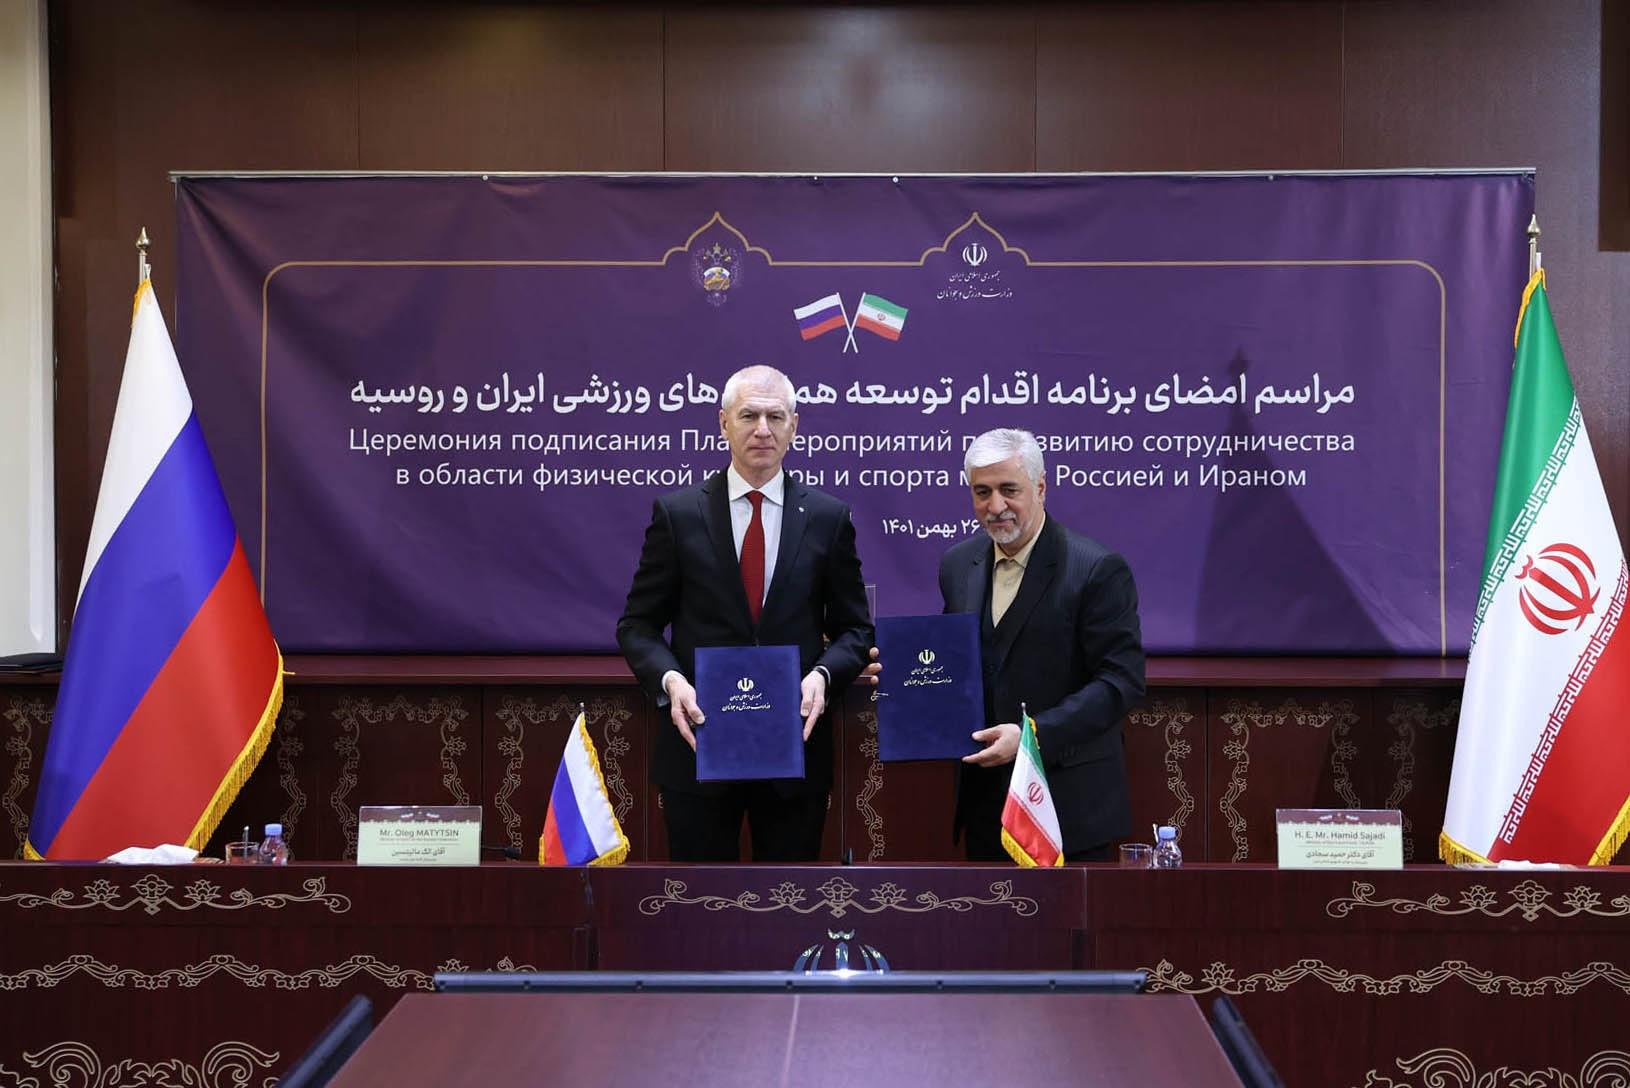 Sports Ministers of Russia and Iran look to strengthen ties with signing of MoU